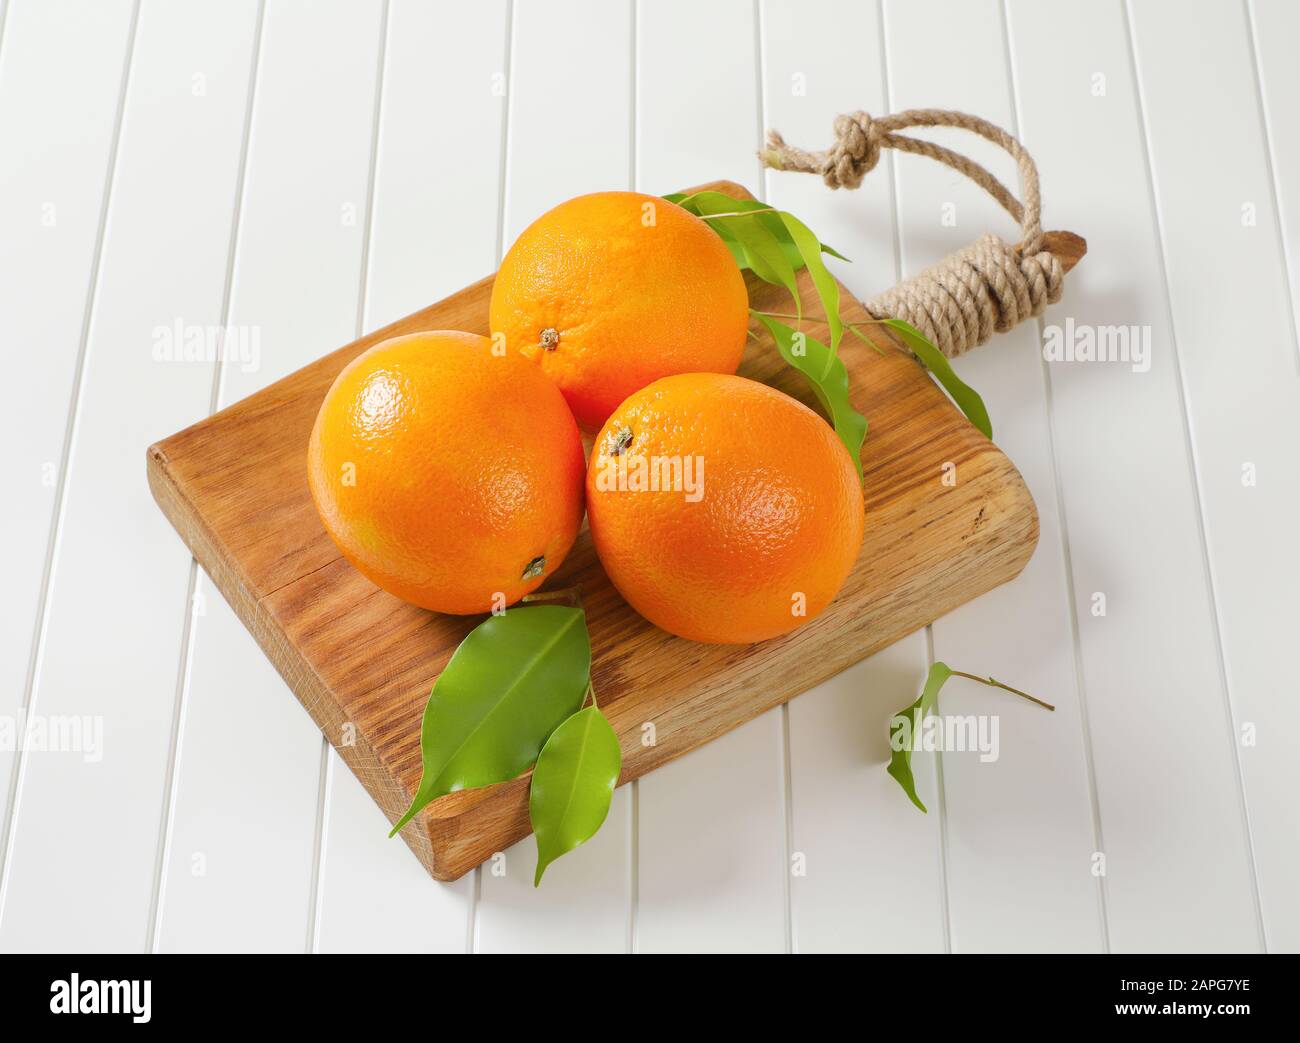 Three whole ripe oranges and leaves on cutting board Stock Photo